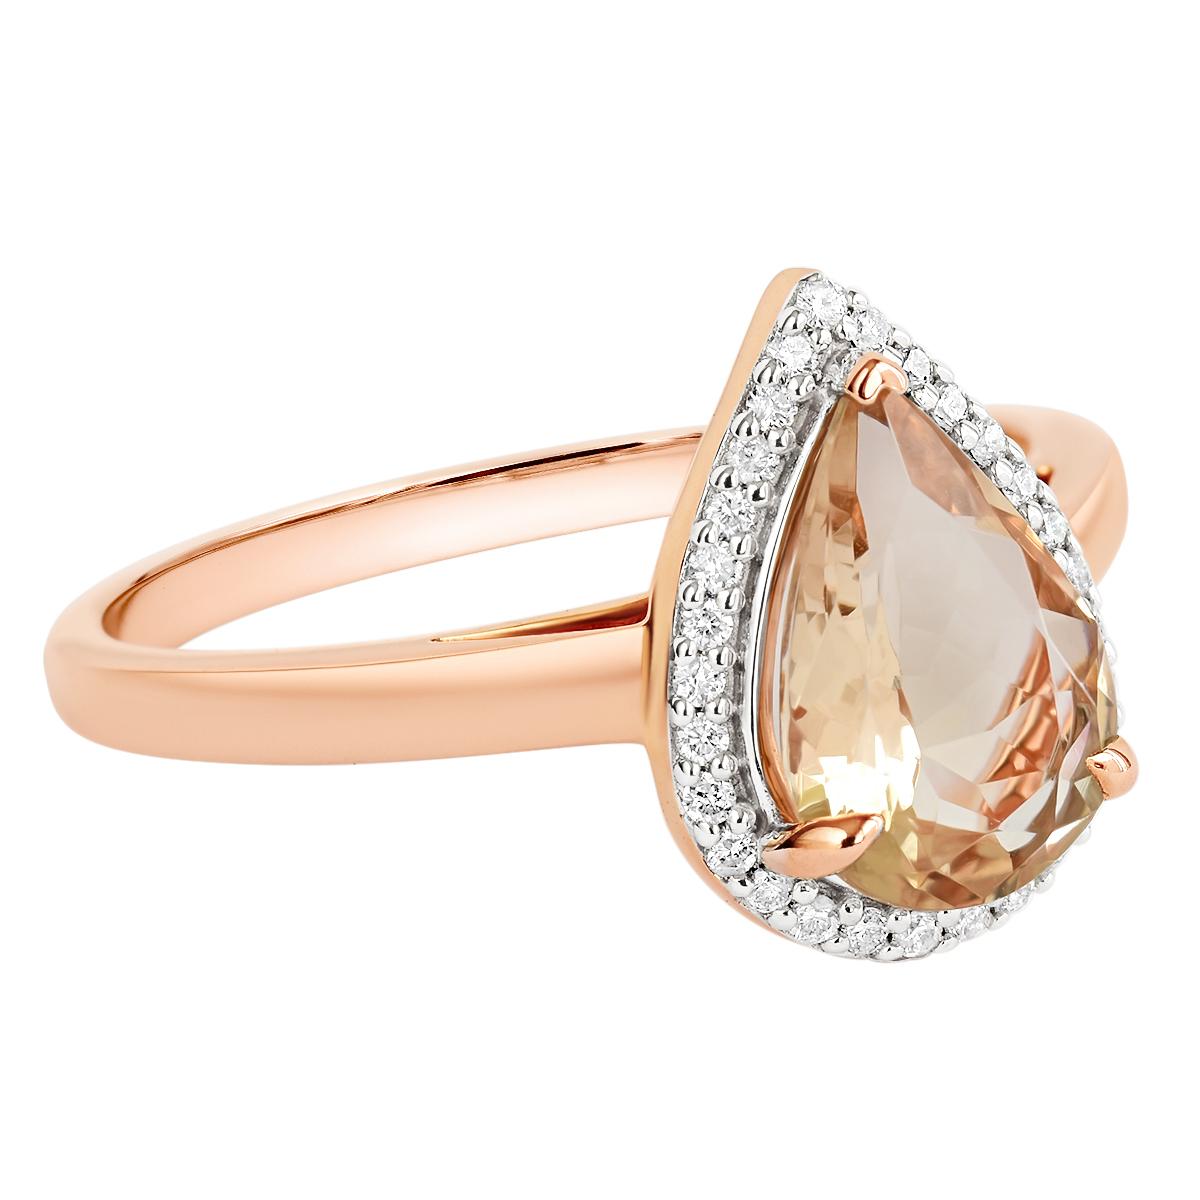 A beautifully crafted solid 9K rose gold ring featuring a 1.28 carat morganite adorned with 29 diamonds in an alluring halo setting. The morganite is natural and earth mined and is an eye pleasing pastel peach in colour with flashes of pink visible